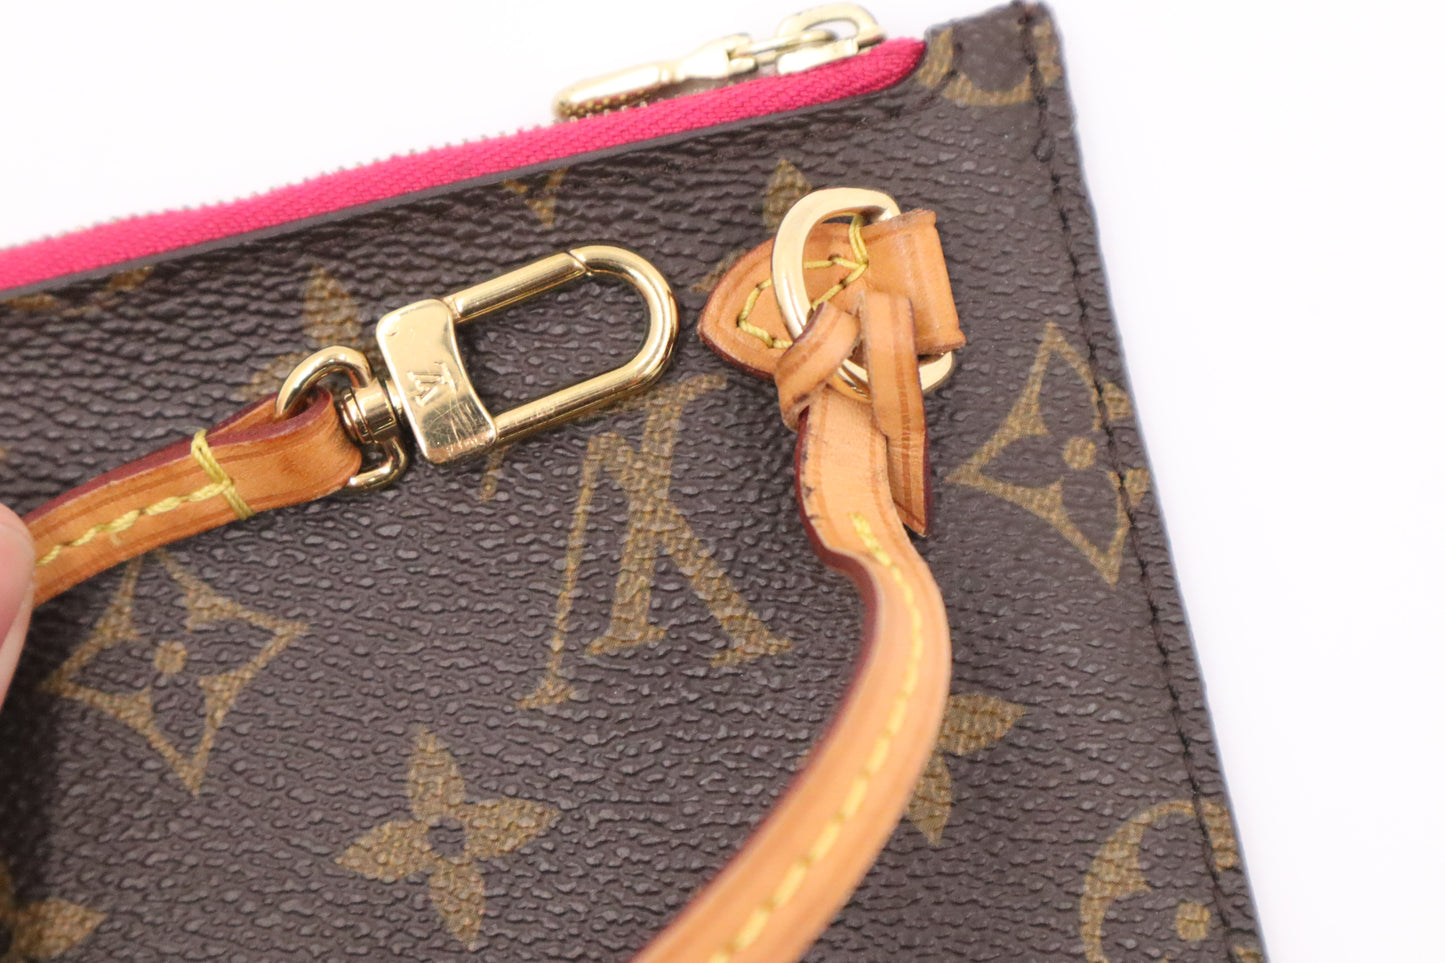 Louis Vuitton Neverfull Pouch in Monogram Canvas